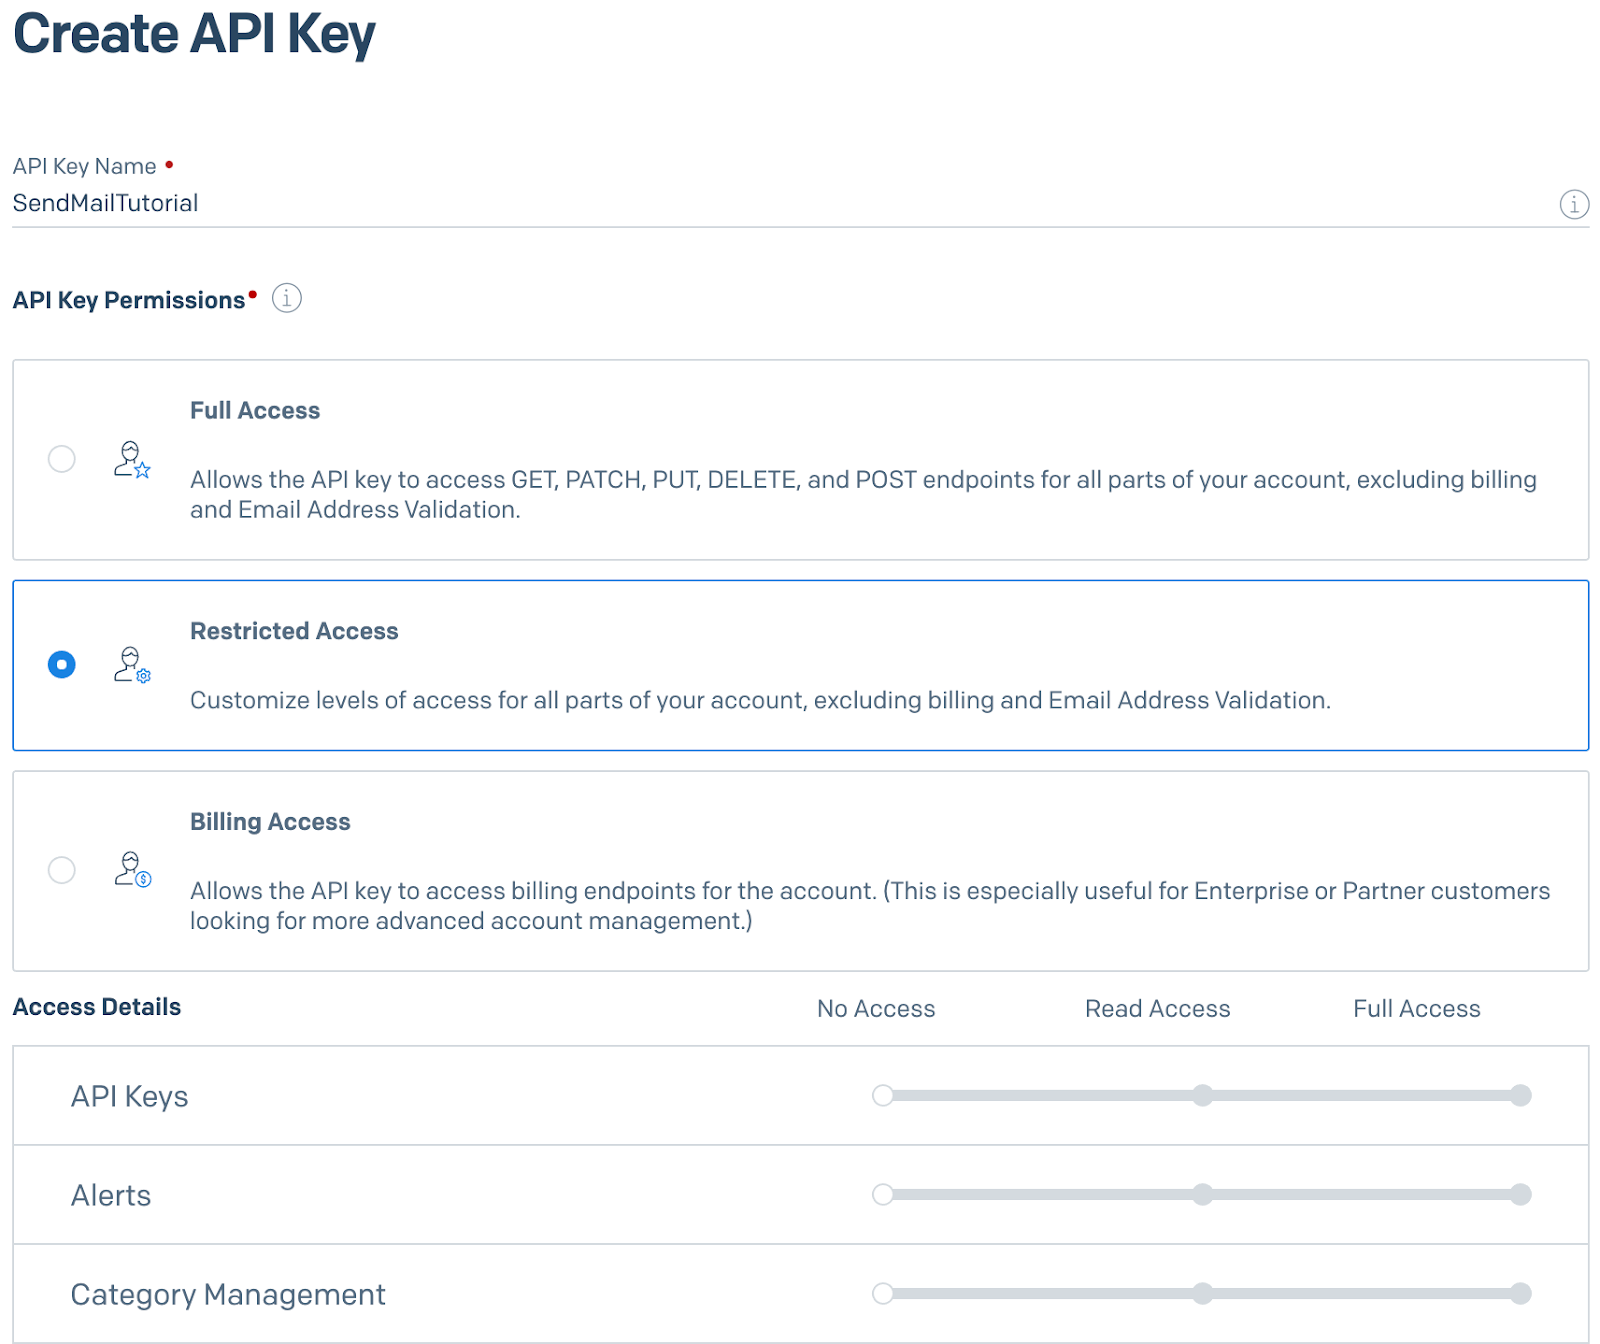 A form to create an API Key. The form asks for a name for the key and what permissions to grant to the key.